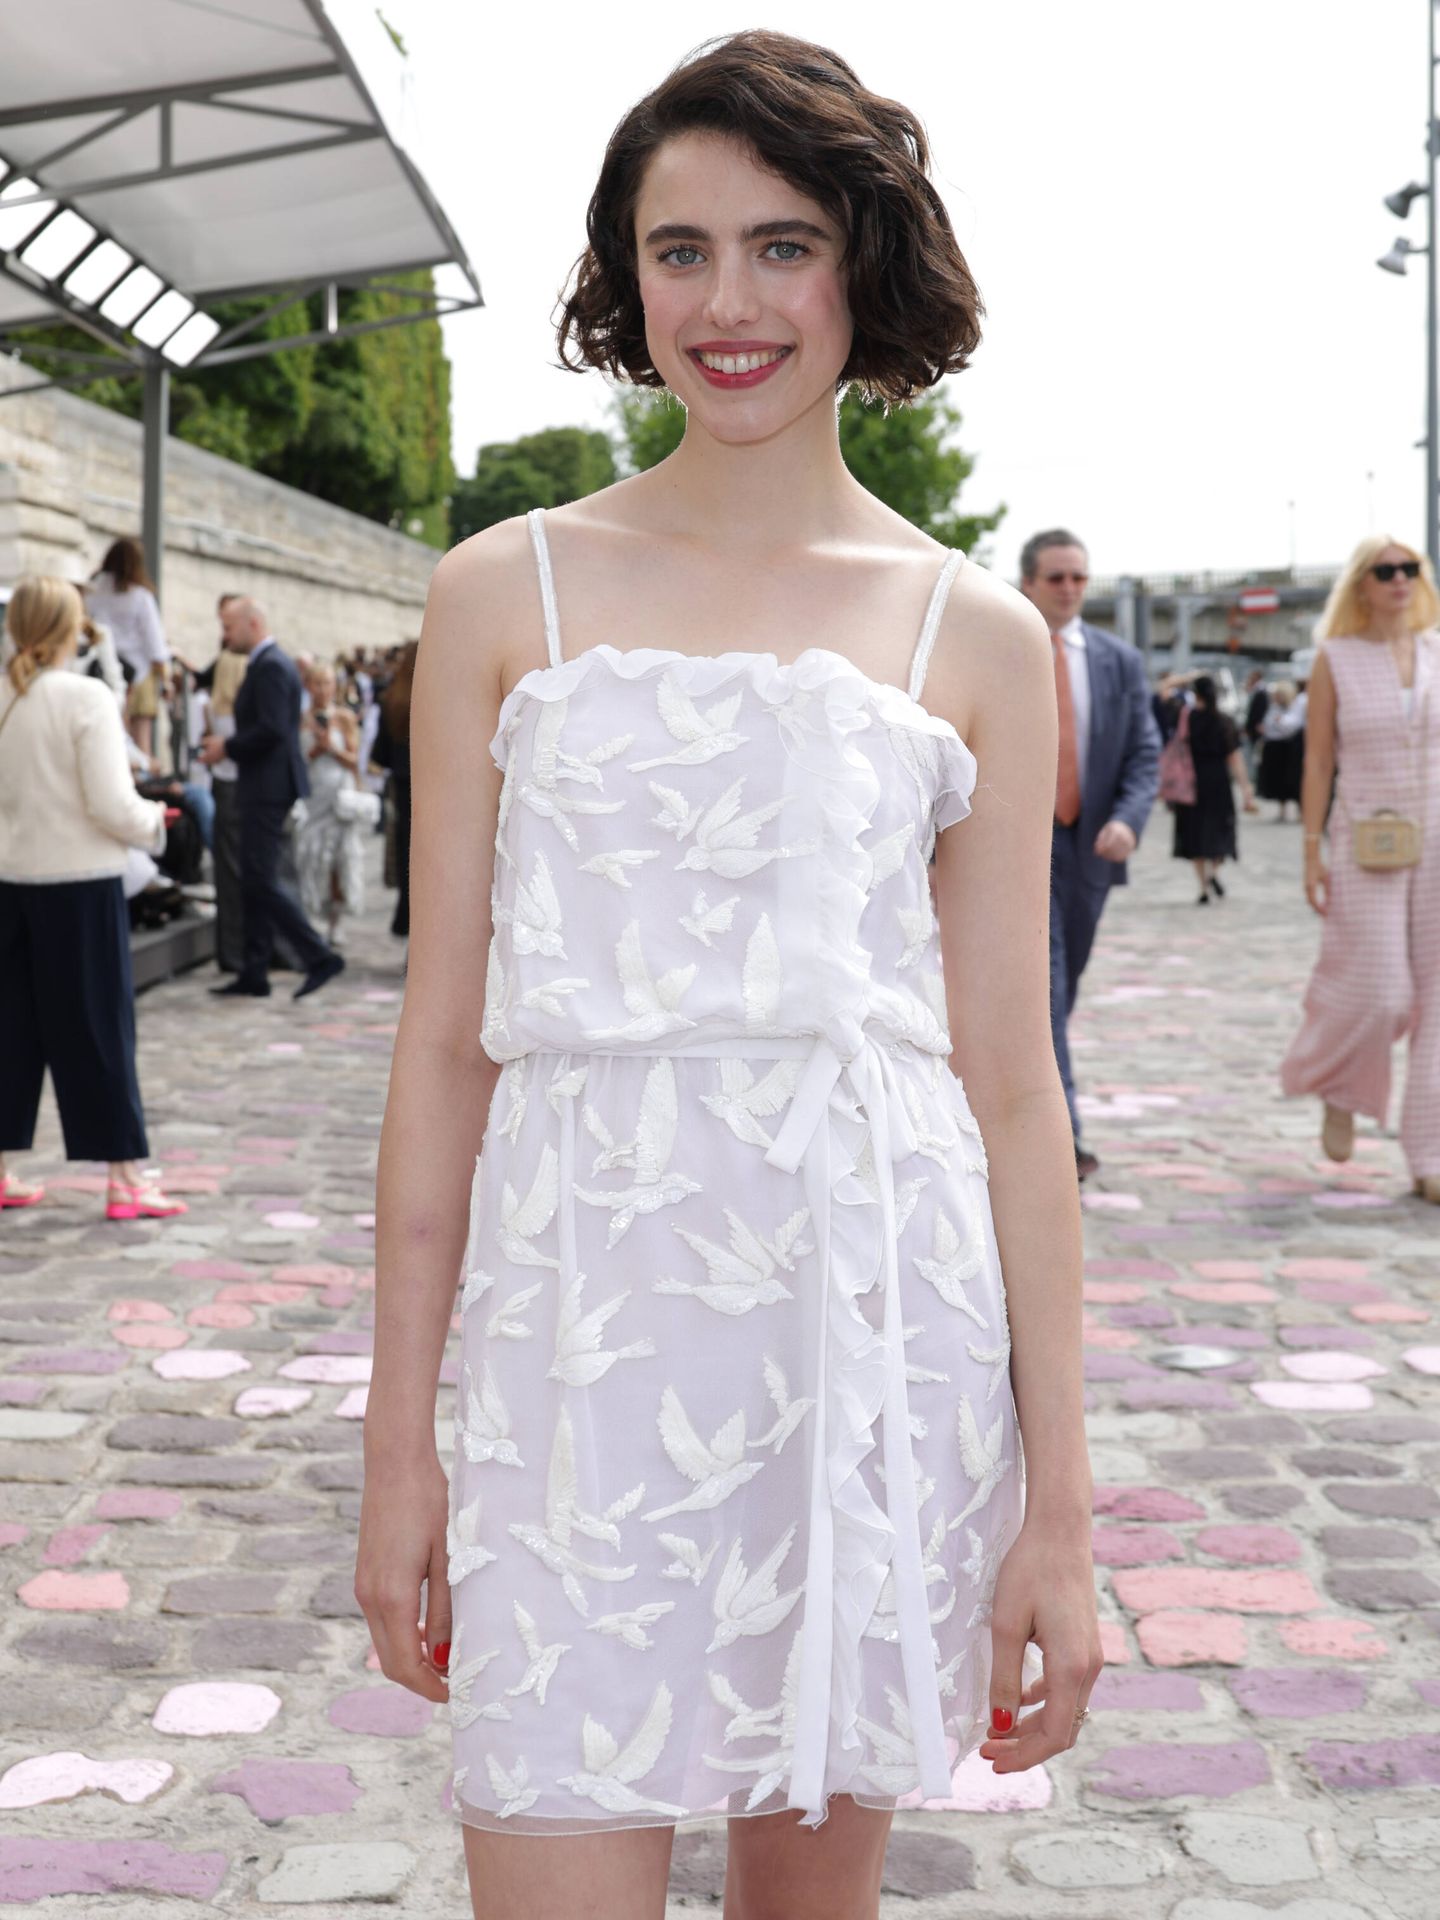 Margaret Qualley. (Getty Images)